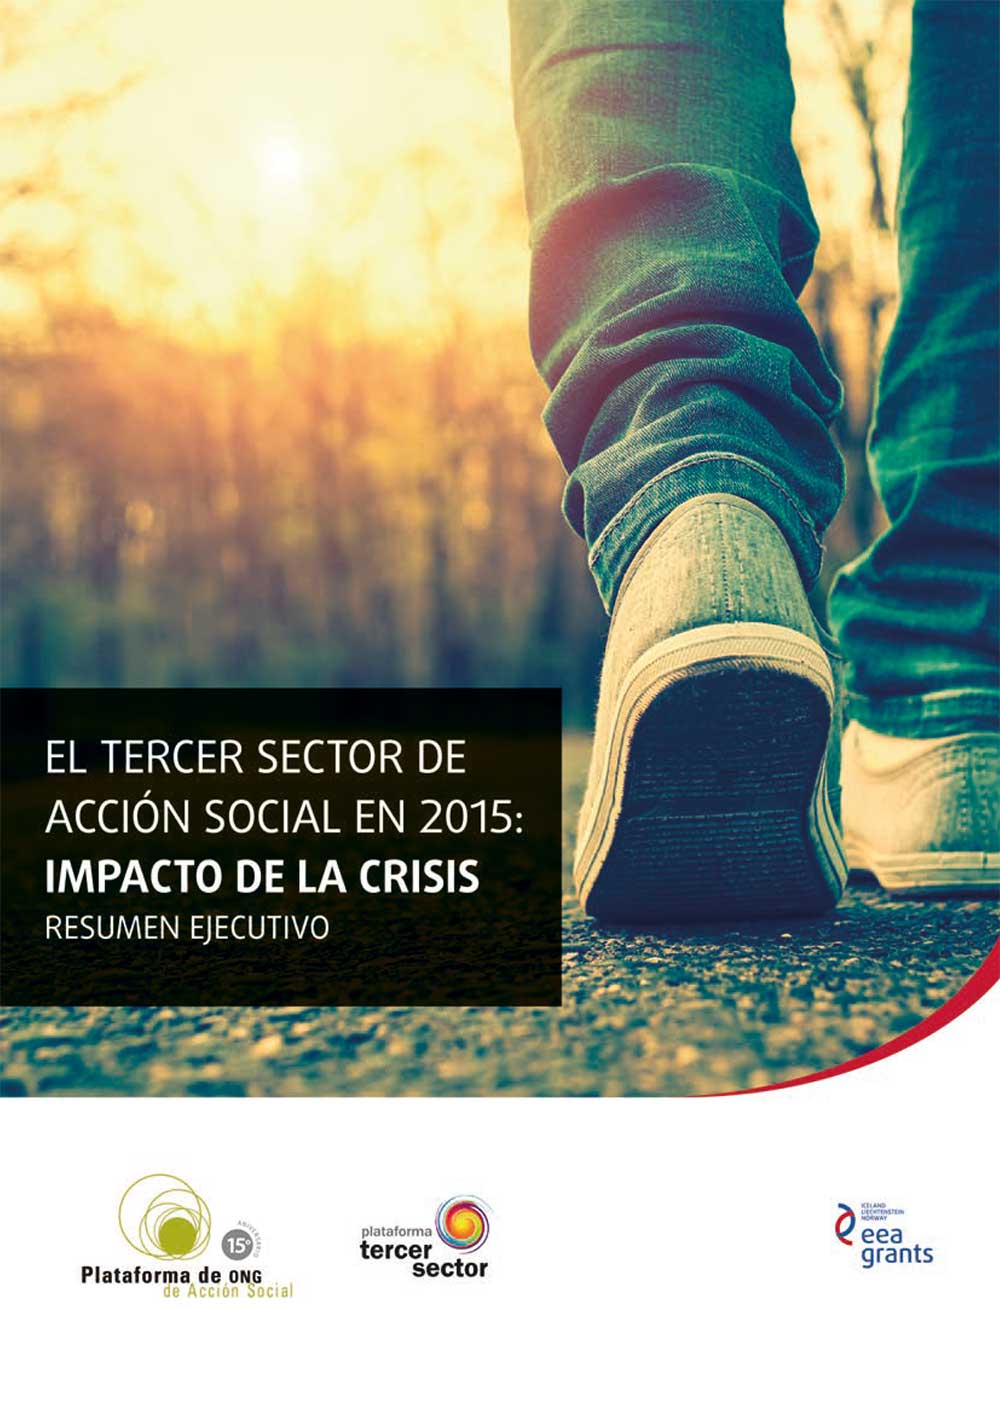 Study of the Third Sector of Social Action